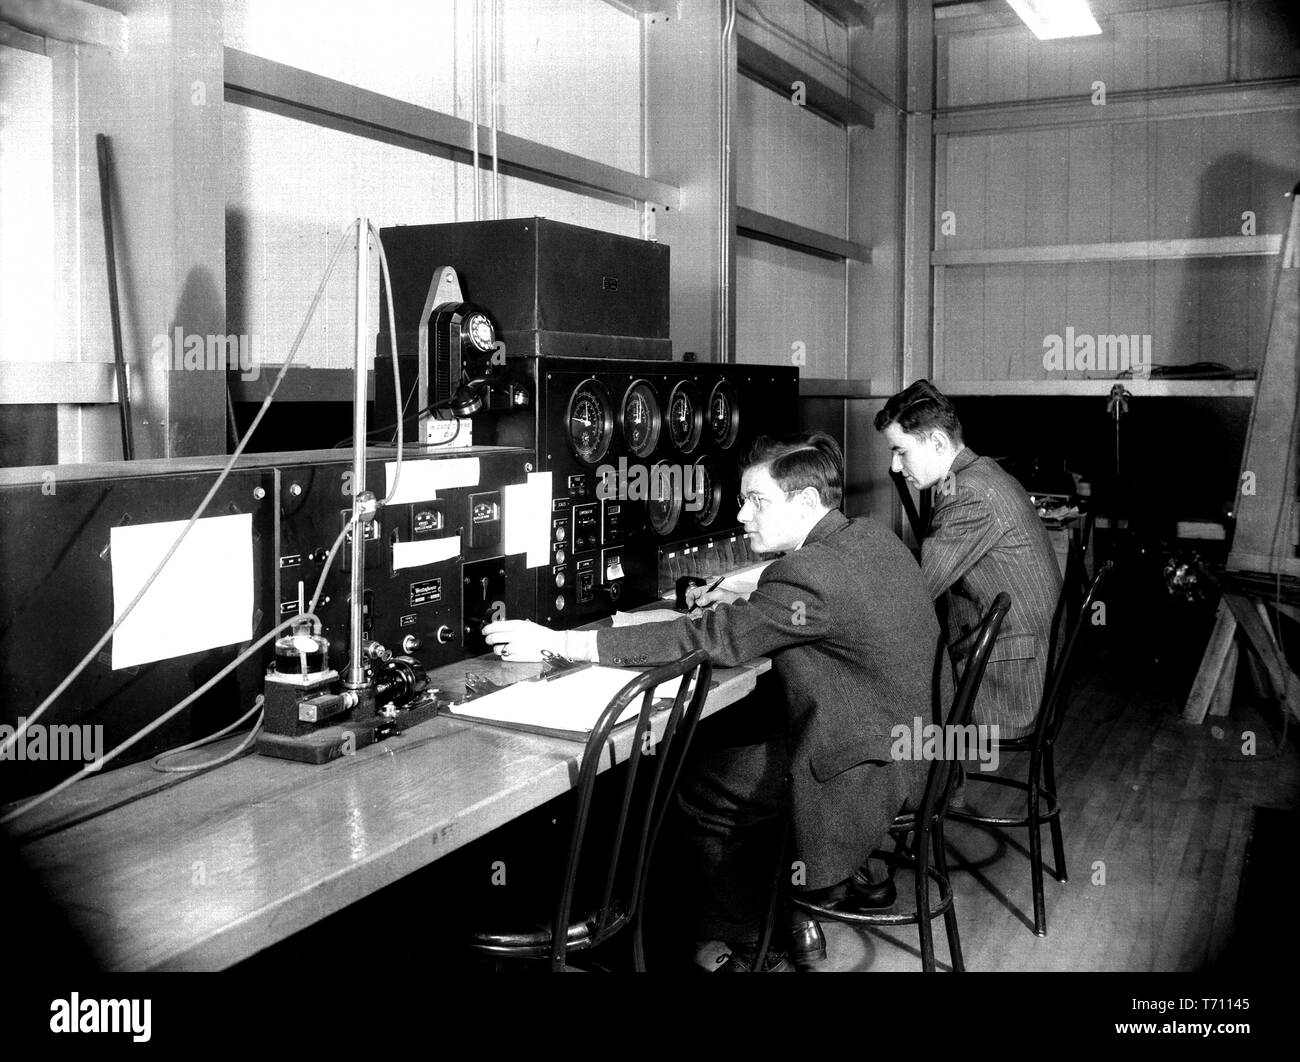 Engineers operating the controls of the Stability Tunnel at Langley Aeronautical Laboratory in Hampton, Virginia, March 10, 1943. Image courtesy National Aeronautics and Space Administration (NASA). () Stock Photo